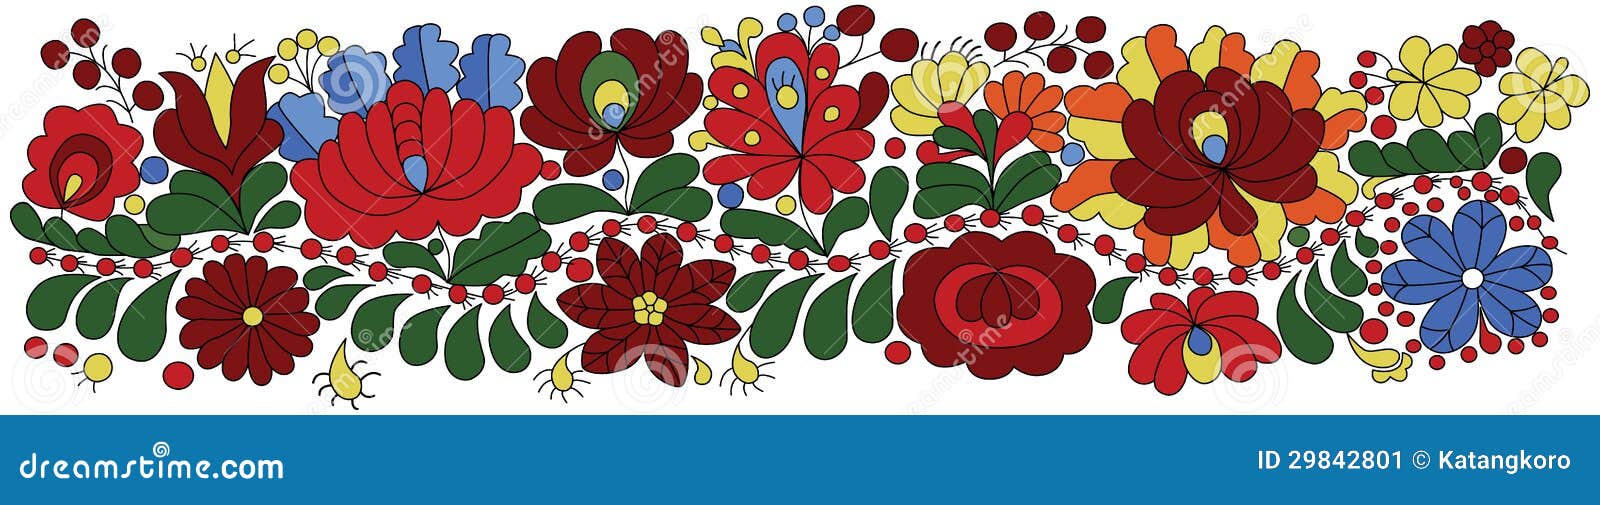 hungarian embroidery pattern